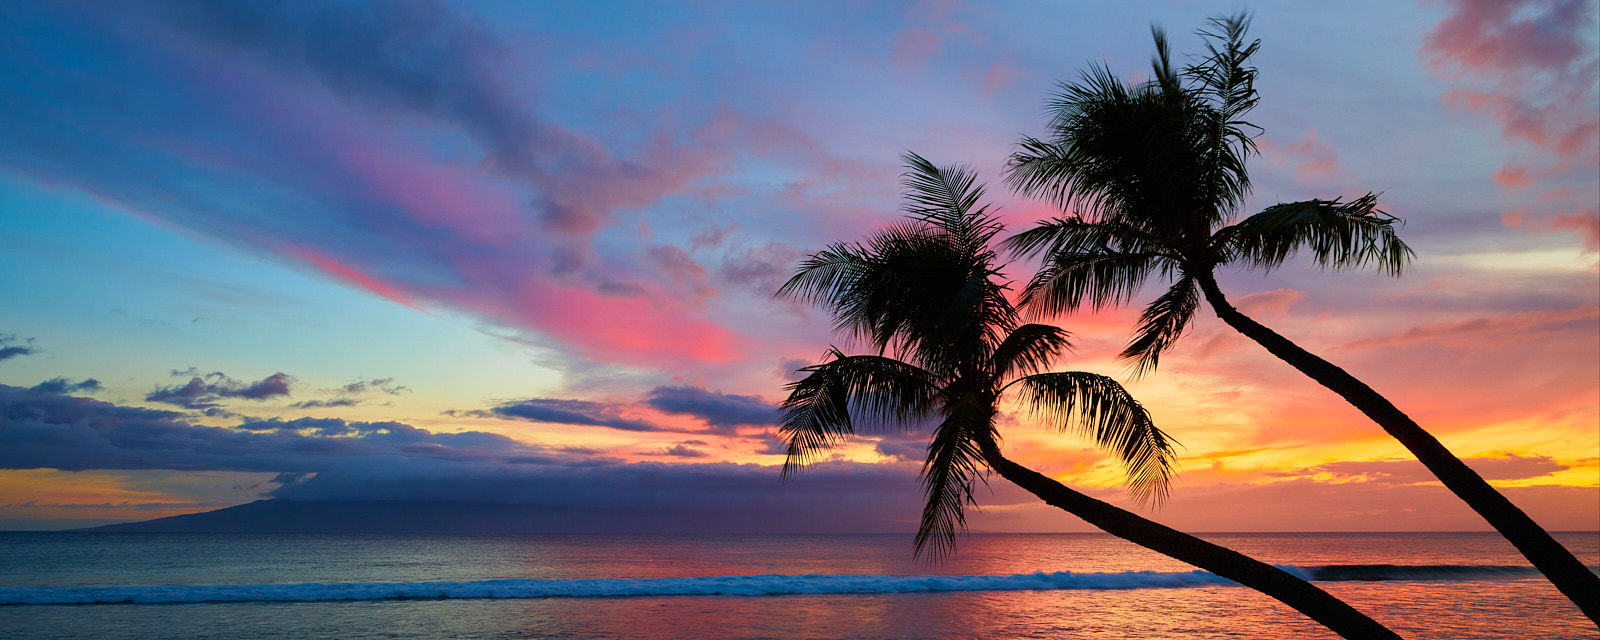 panoramic sunset photograph featuring two palms on Kaanapali Beach on the island of Maui, Hawaii.  